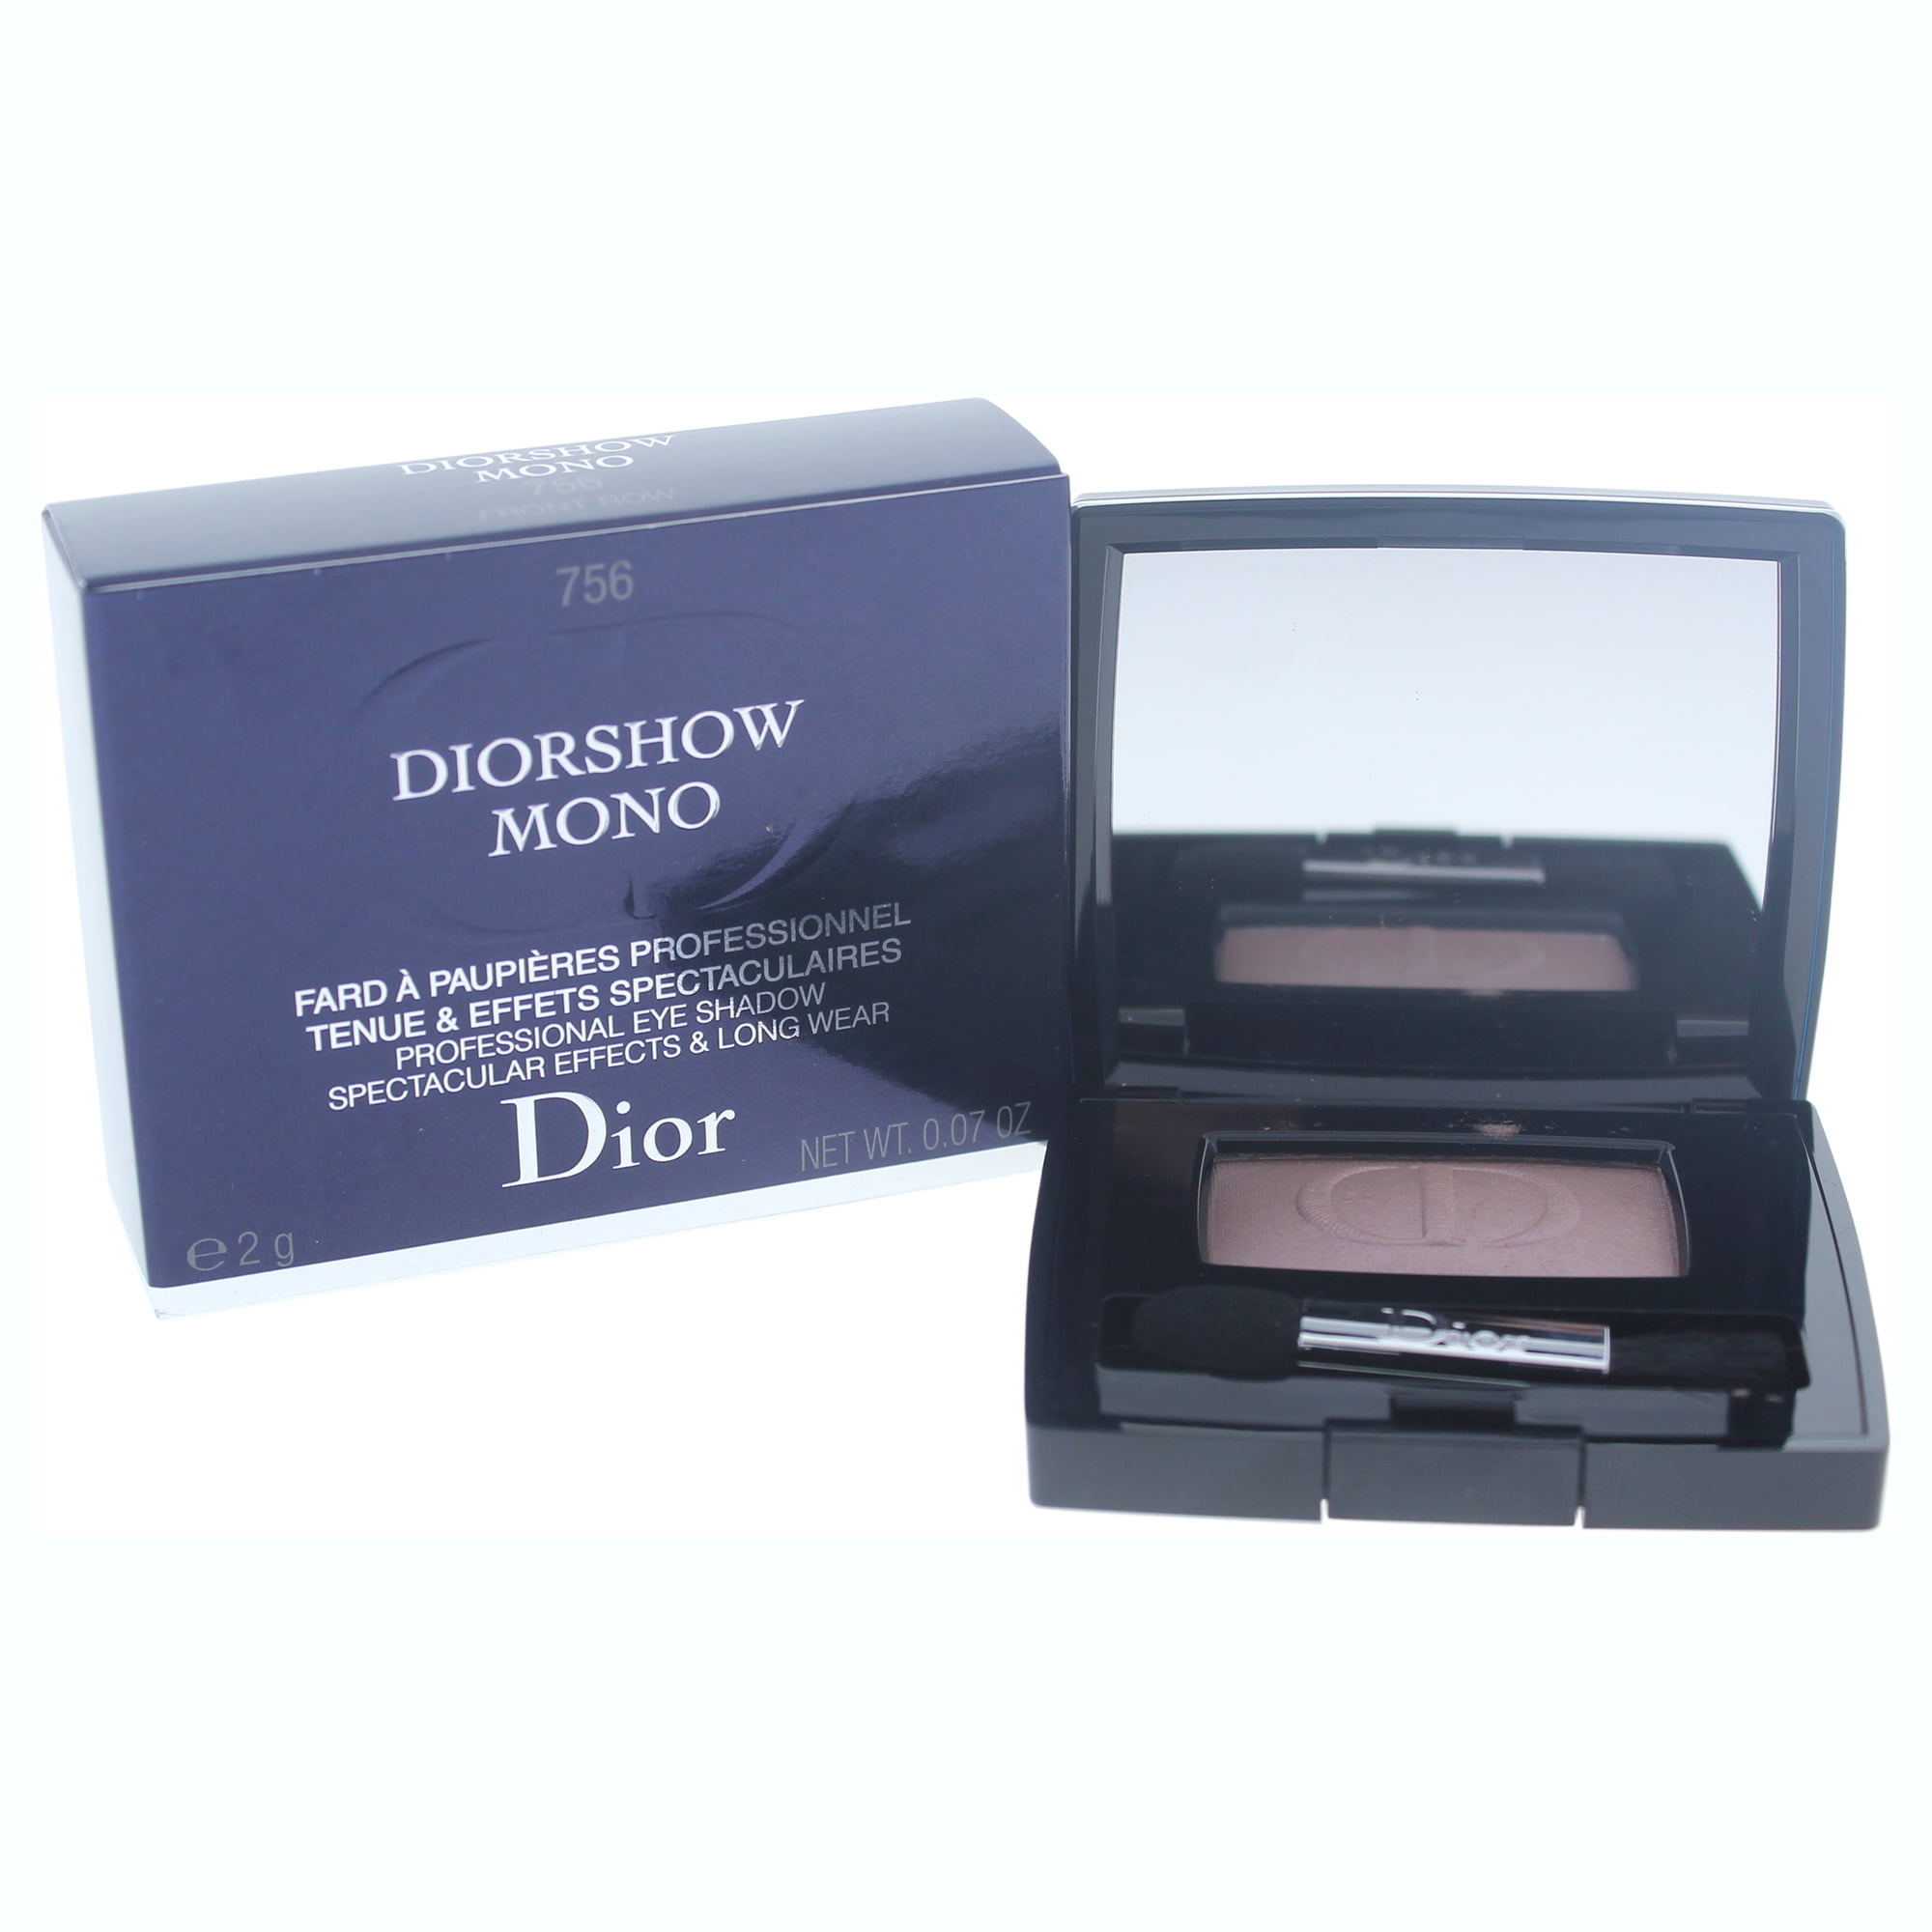 Diorshow Mono Professional Eye Shadow - # 756 Front Row by Christian